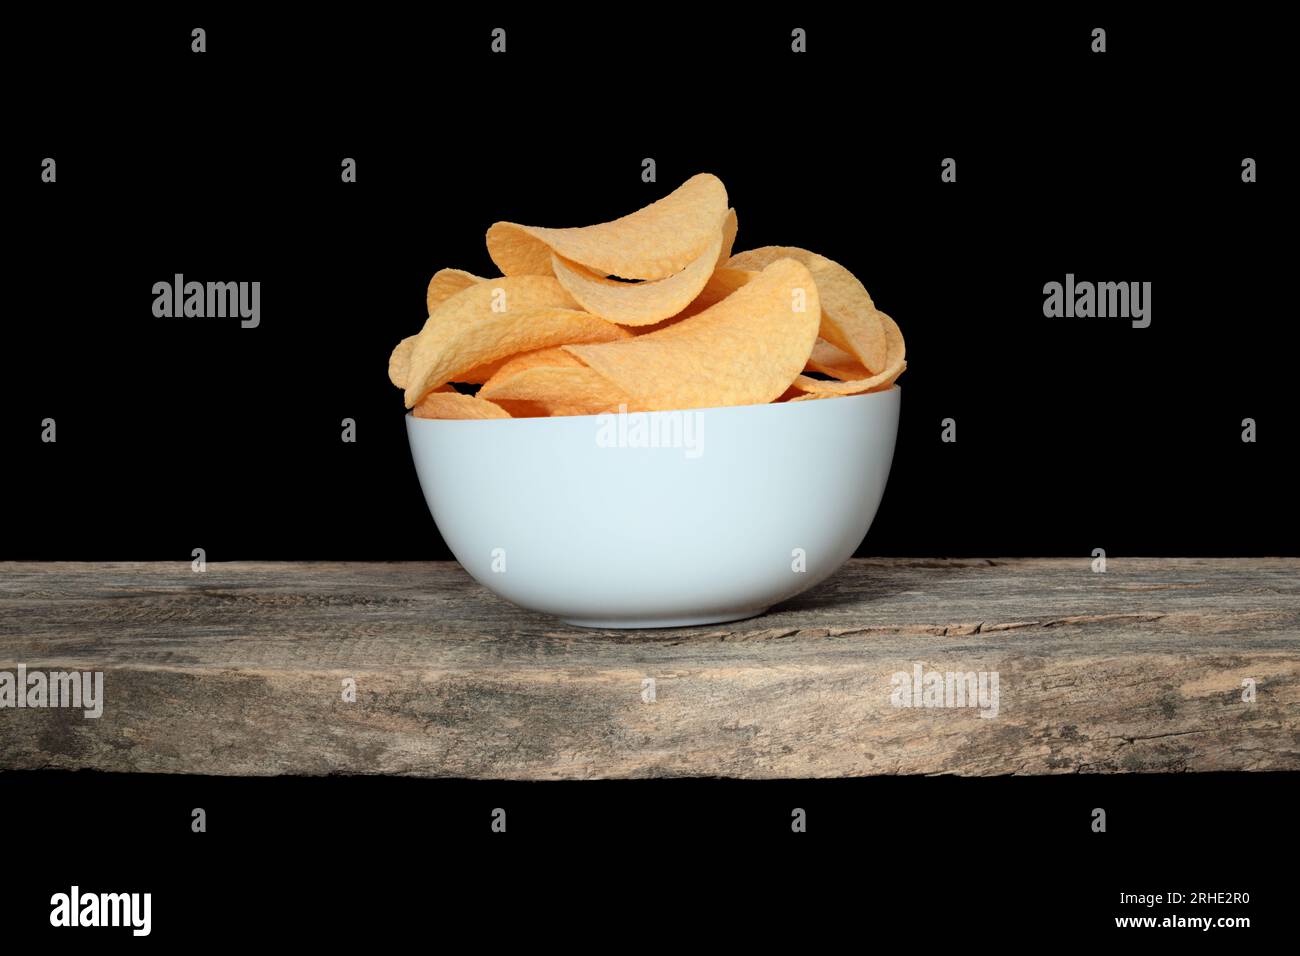 Potato chips bowl standing on old wooden plank, on black background close-up Stock Photo